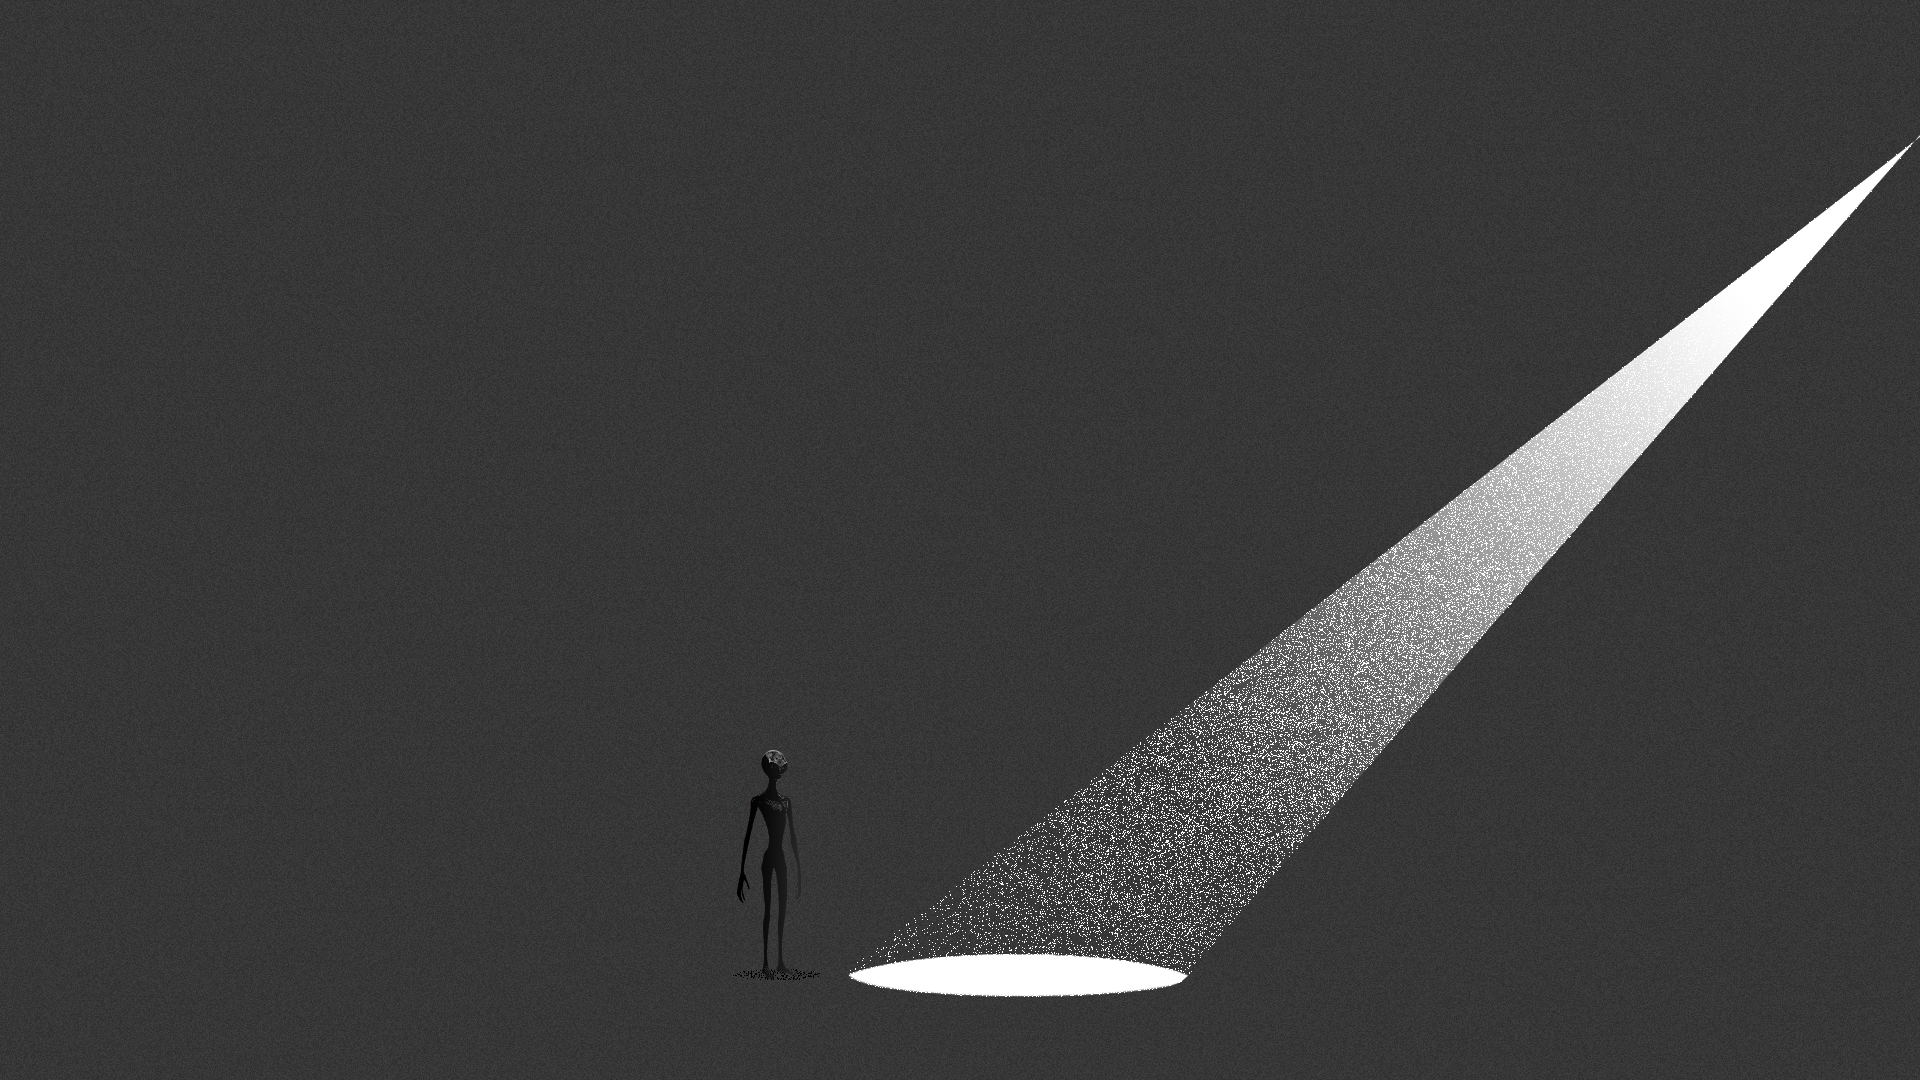 An alien stands just outside of a beam of light against a grey background